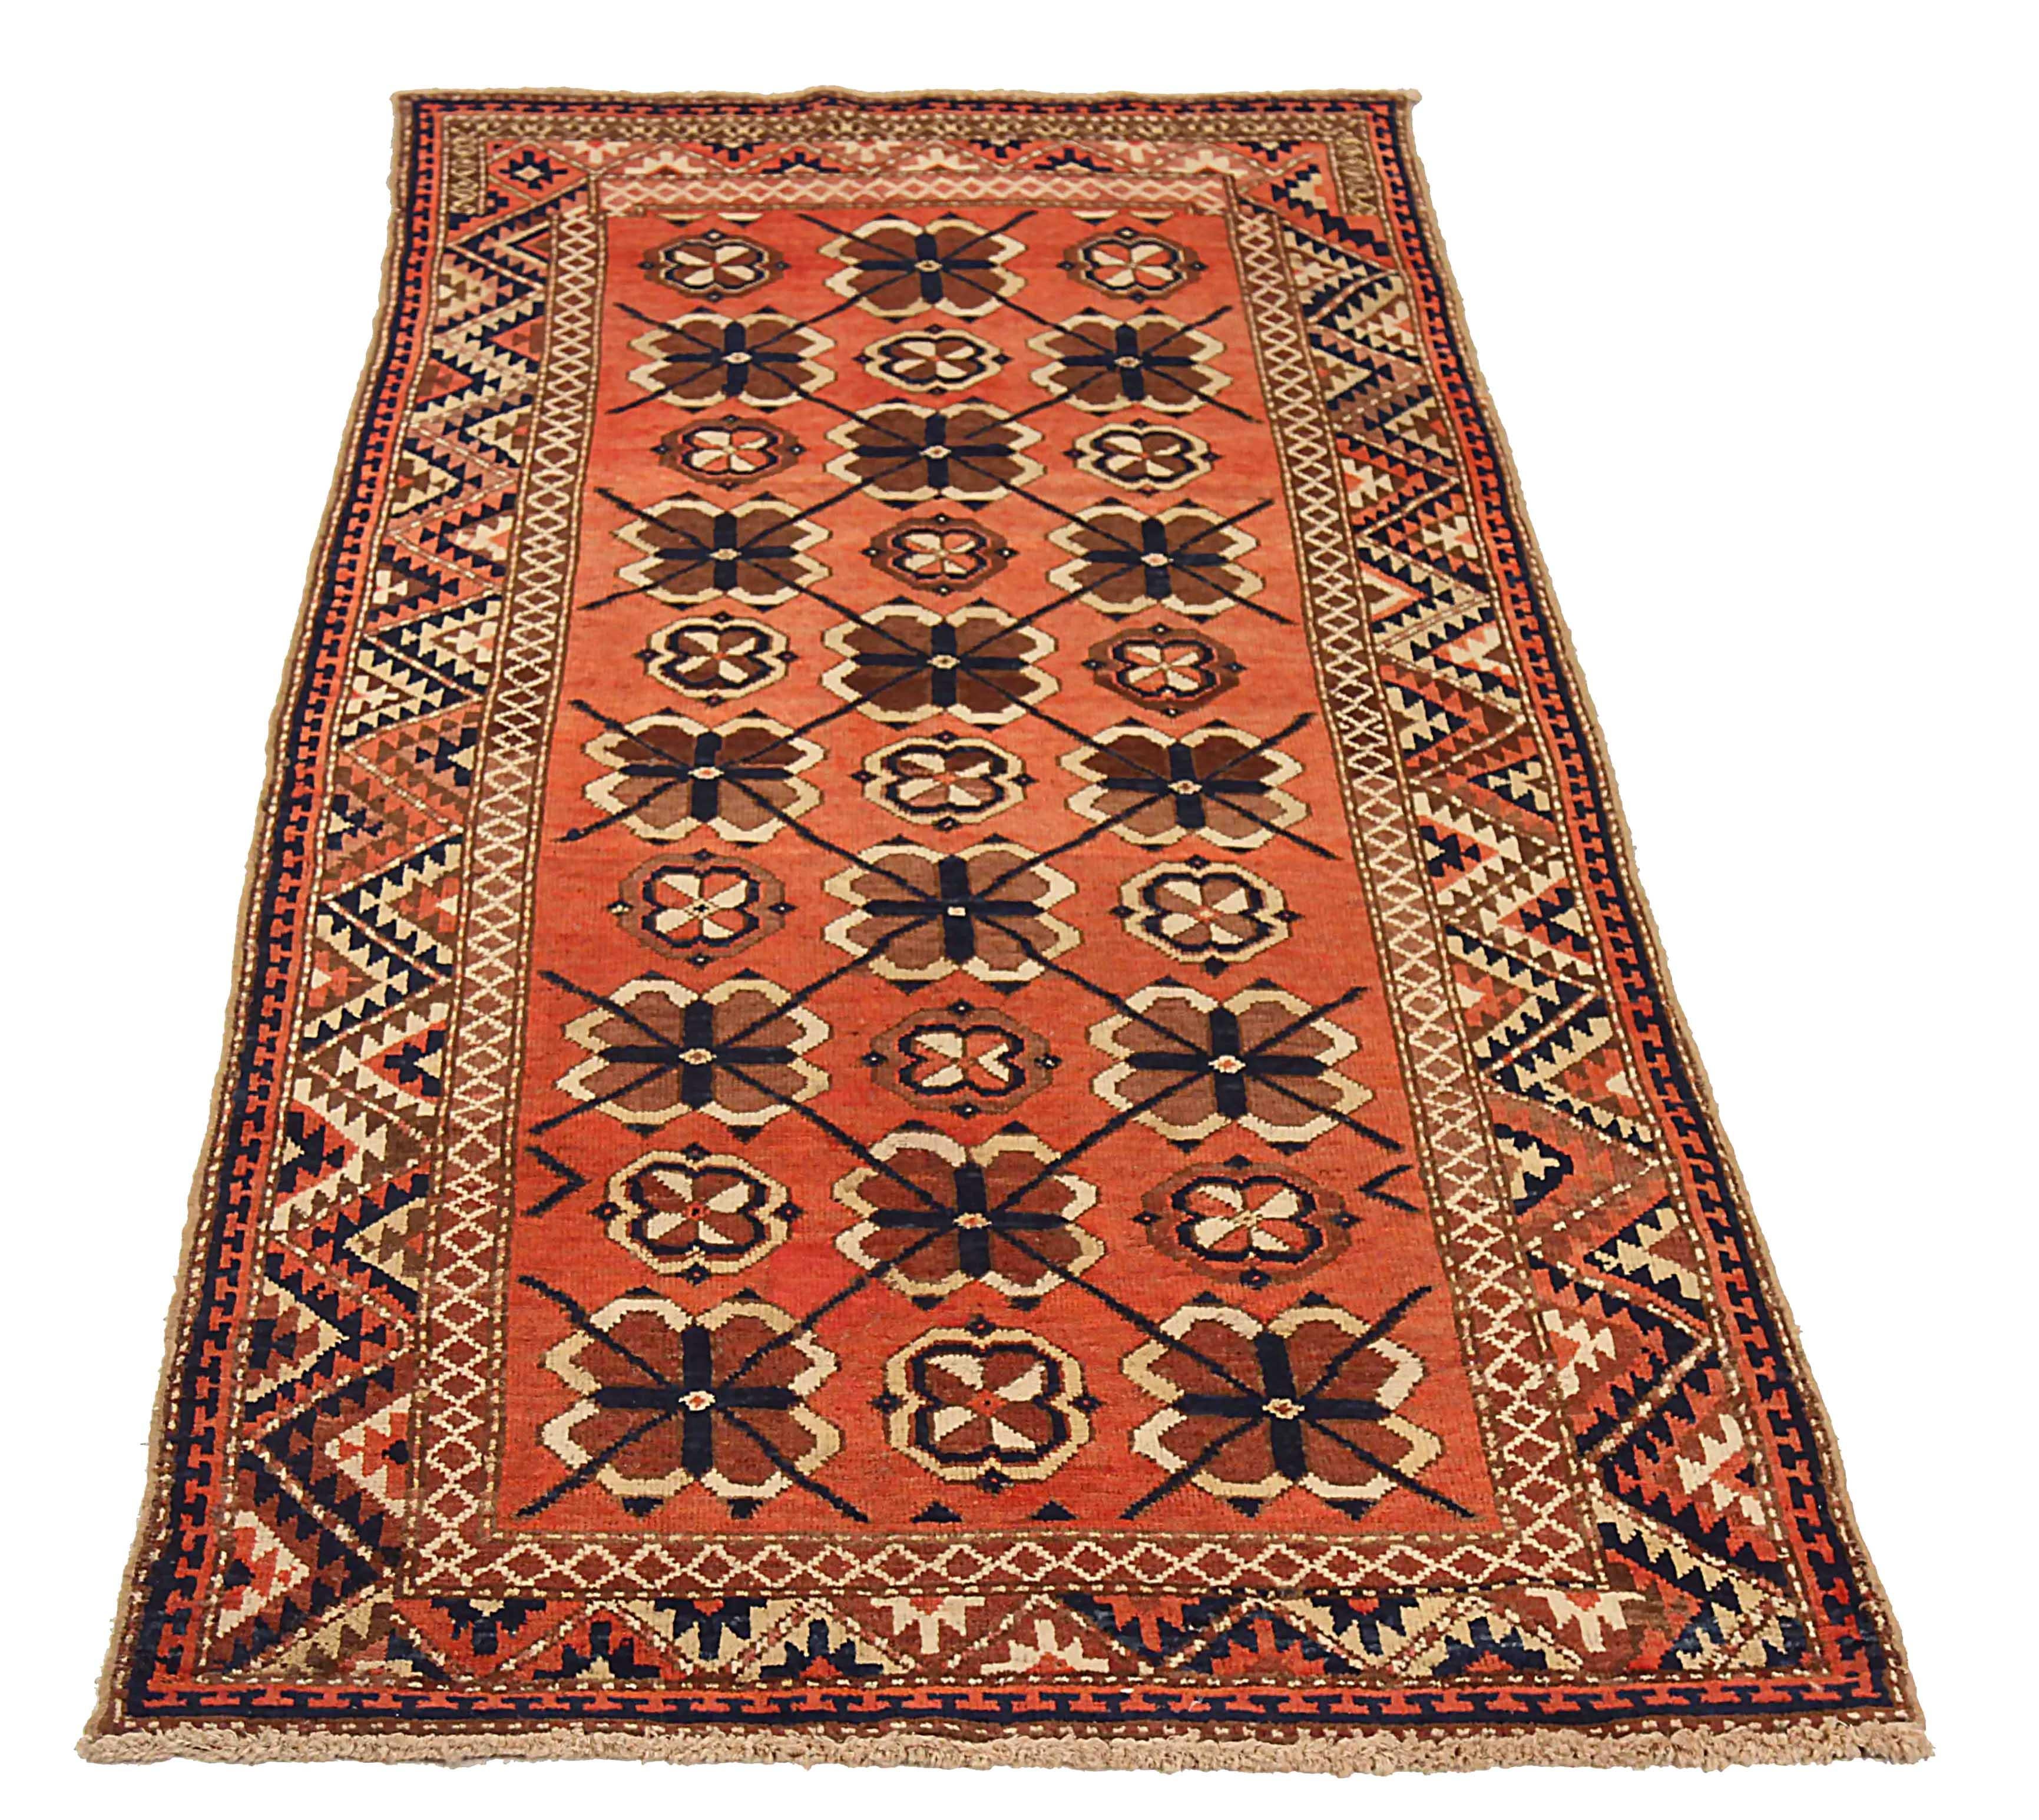 Antique Russian area rug handwoven from the finest sheep’s wool. It’s colored with all-natural vegetable dyes that are safe for humans and pets. It’s a traditional Uzbak design handwoven by expert artisans. It’s a lovely area rug that can be